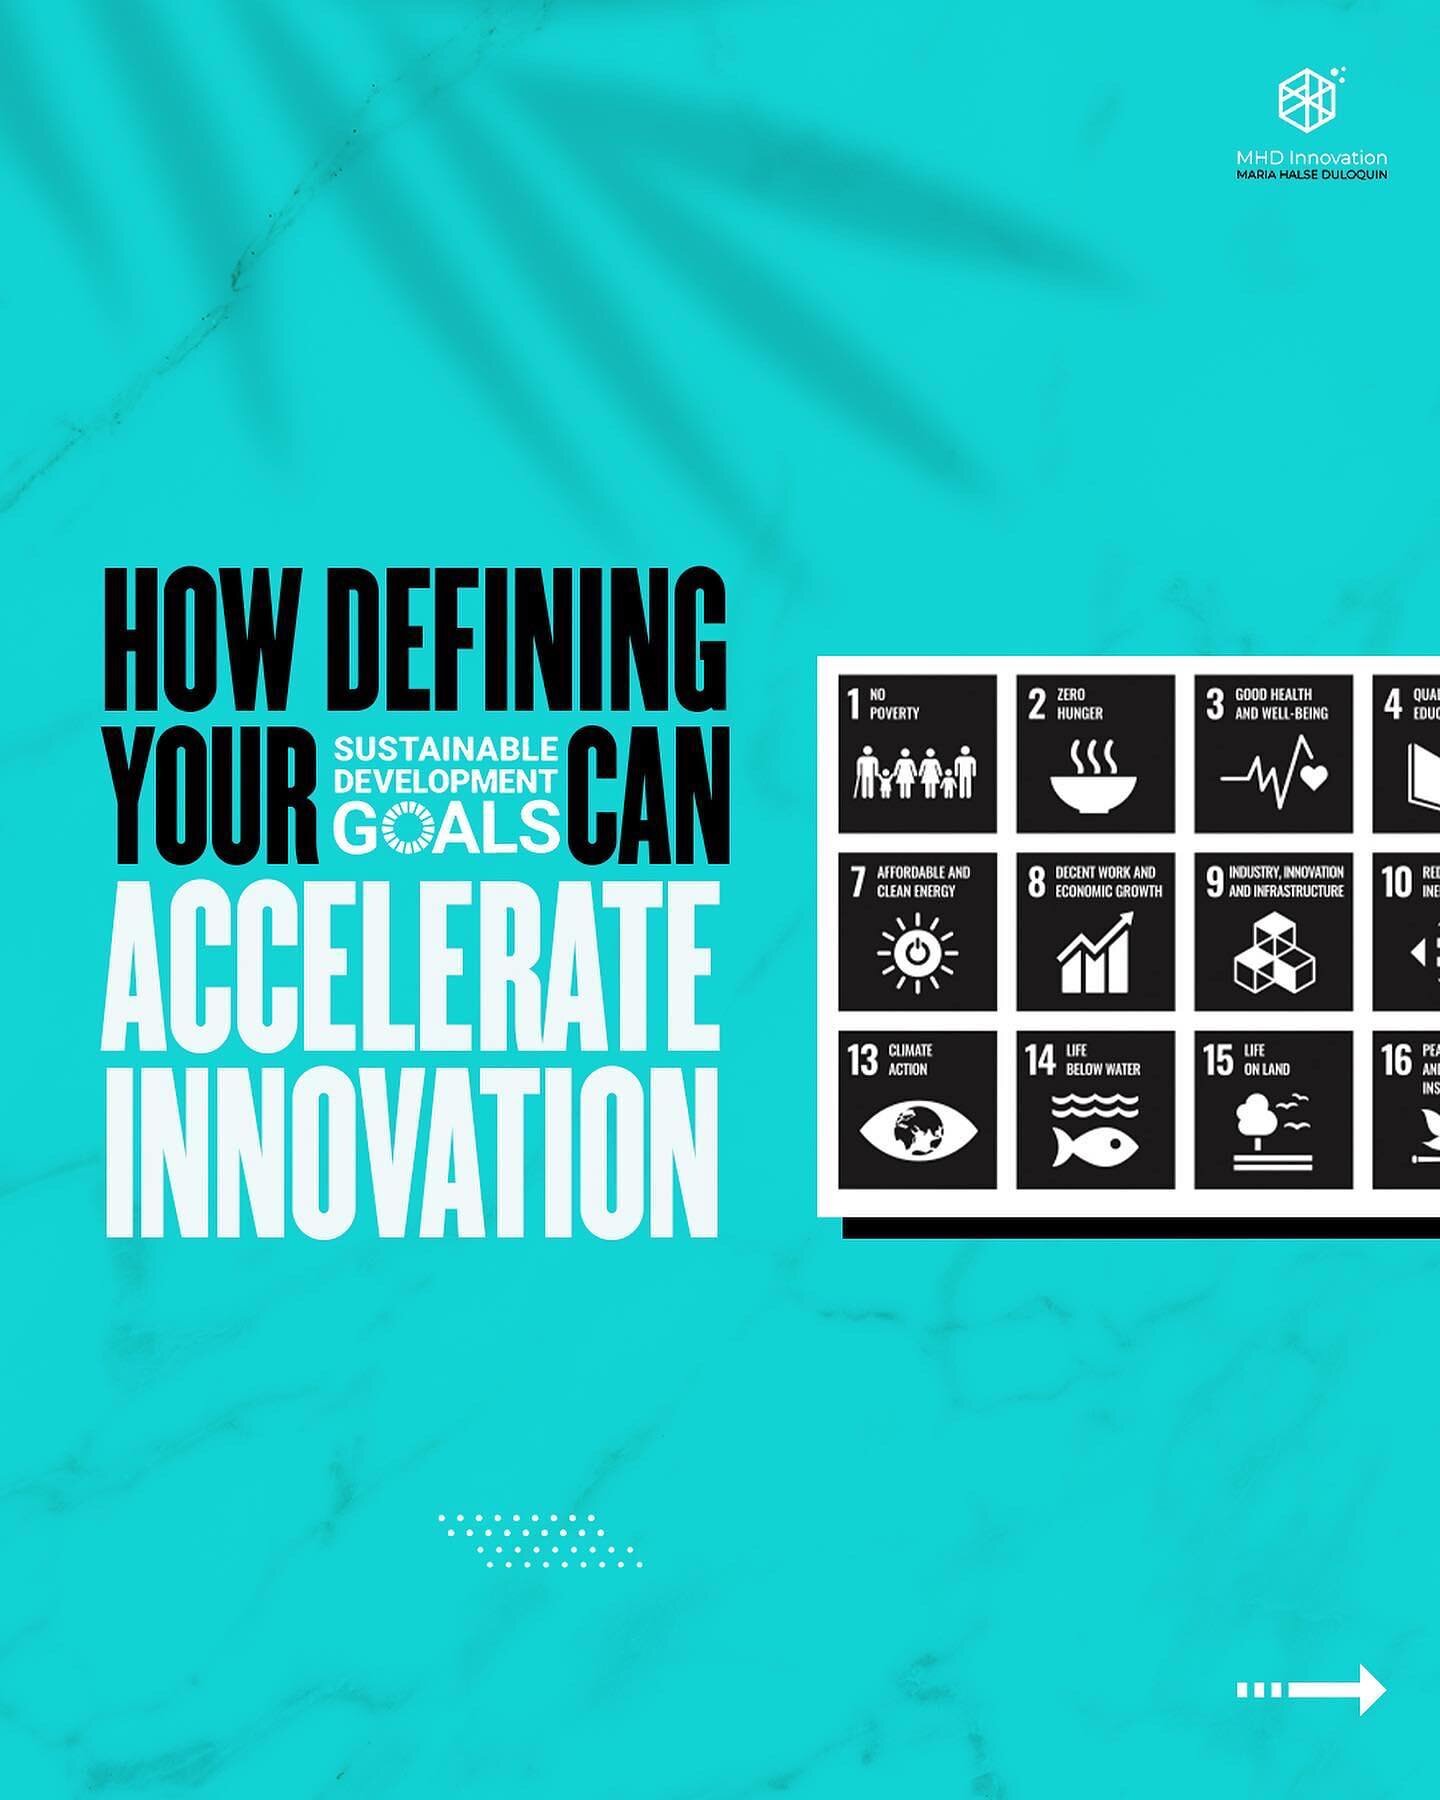 🎯 How defining SDGs can accelerate Innovation 

&ldquo;Once you've defined which Sustainable Development Goals to focus on, you can break them down into specific challenges that your team can actually answer. A defined challenge is crucial to openin